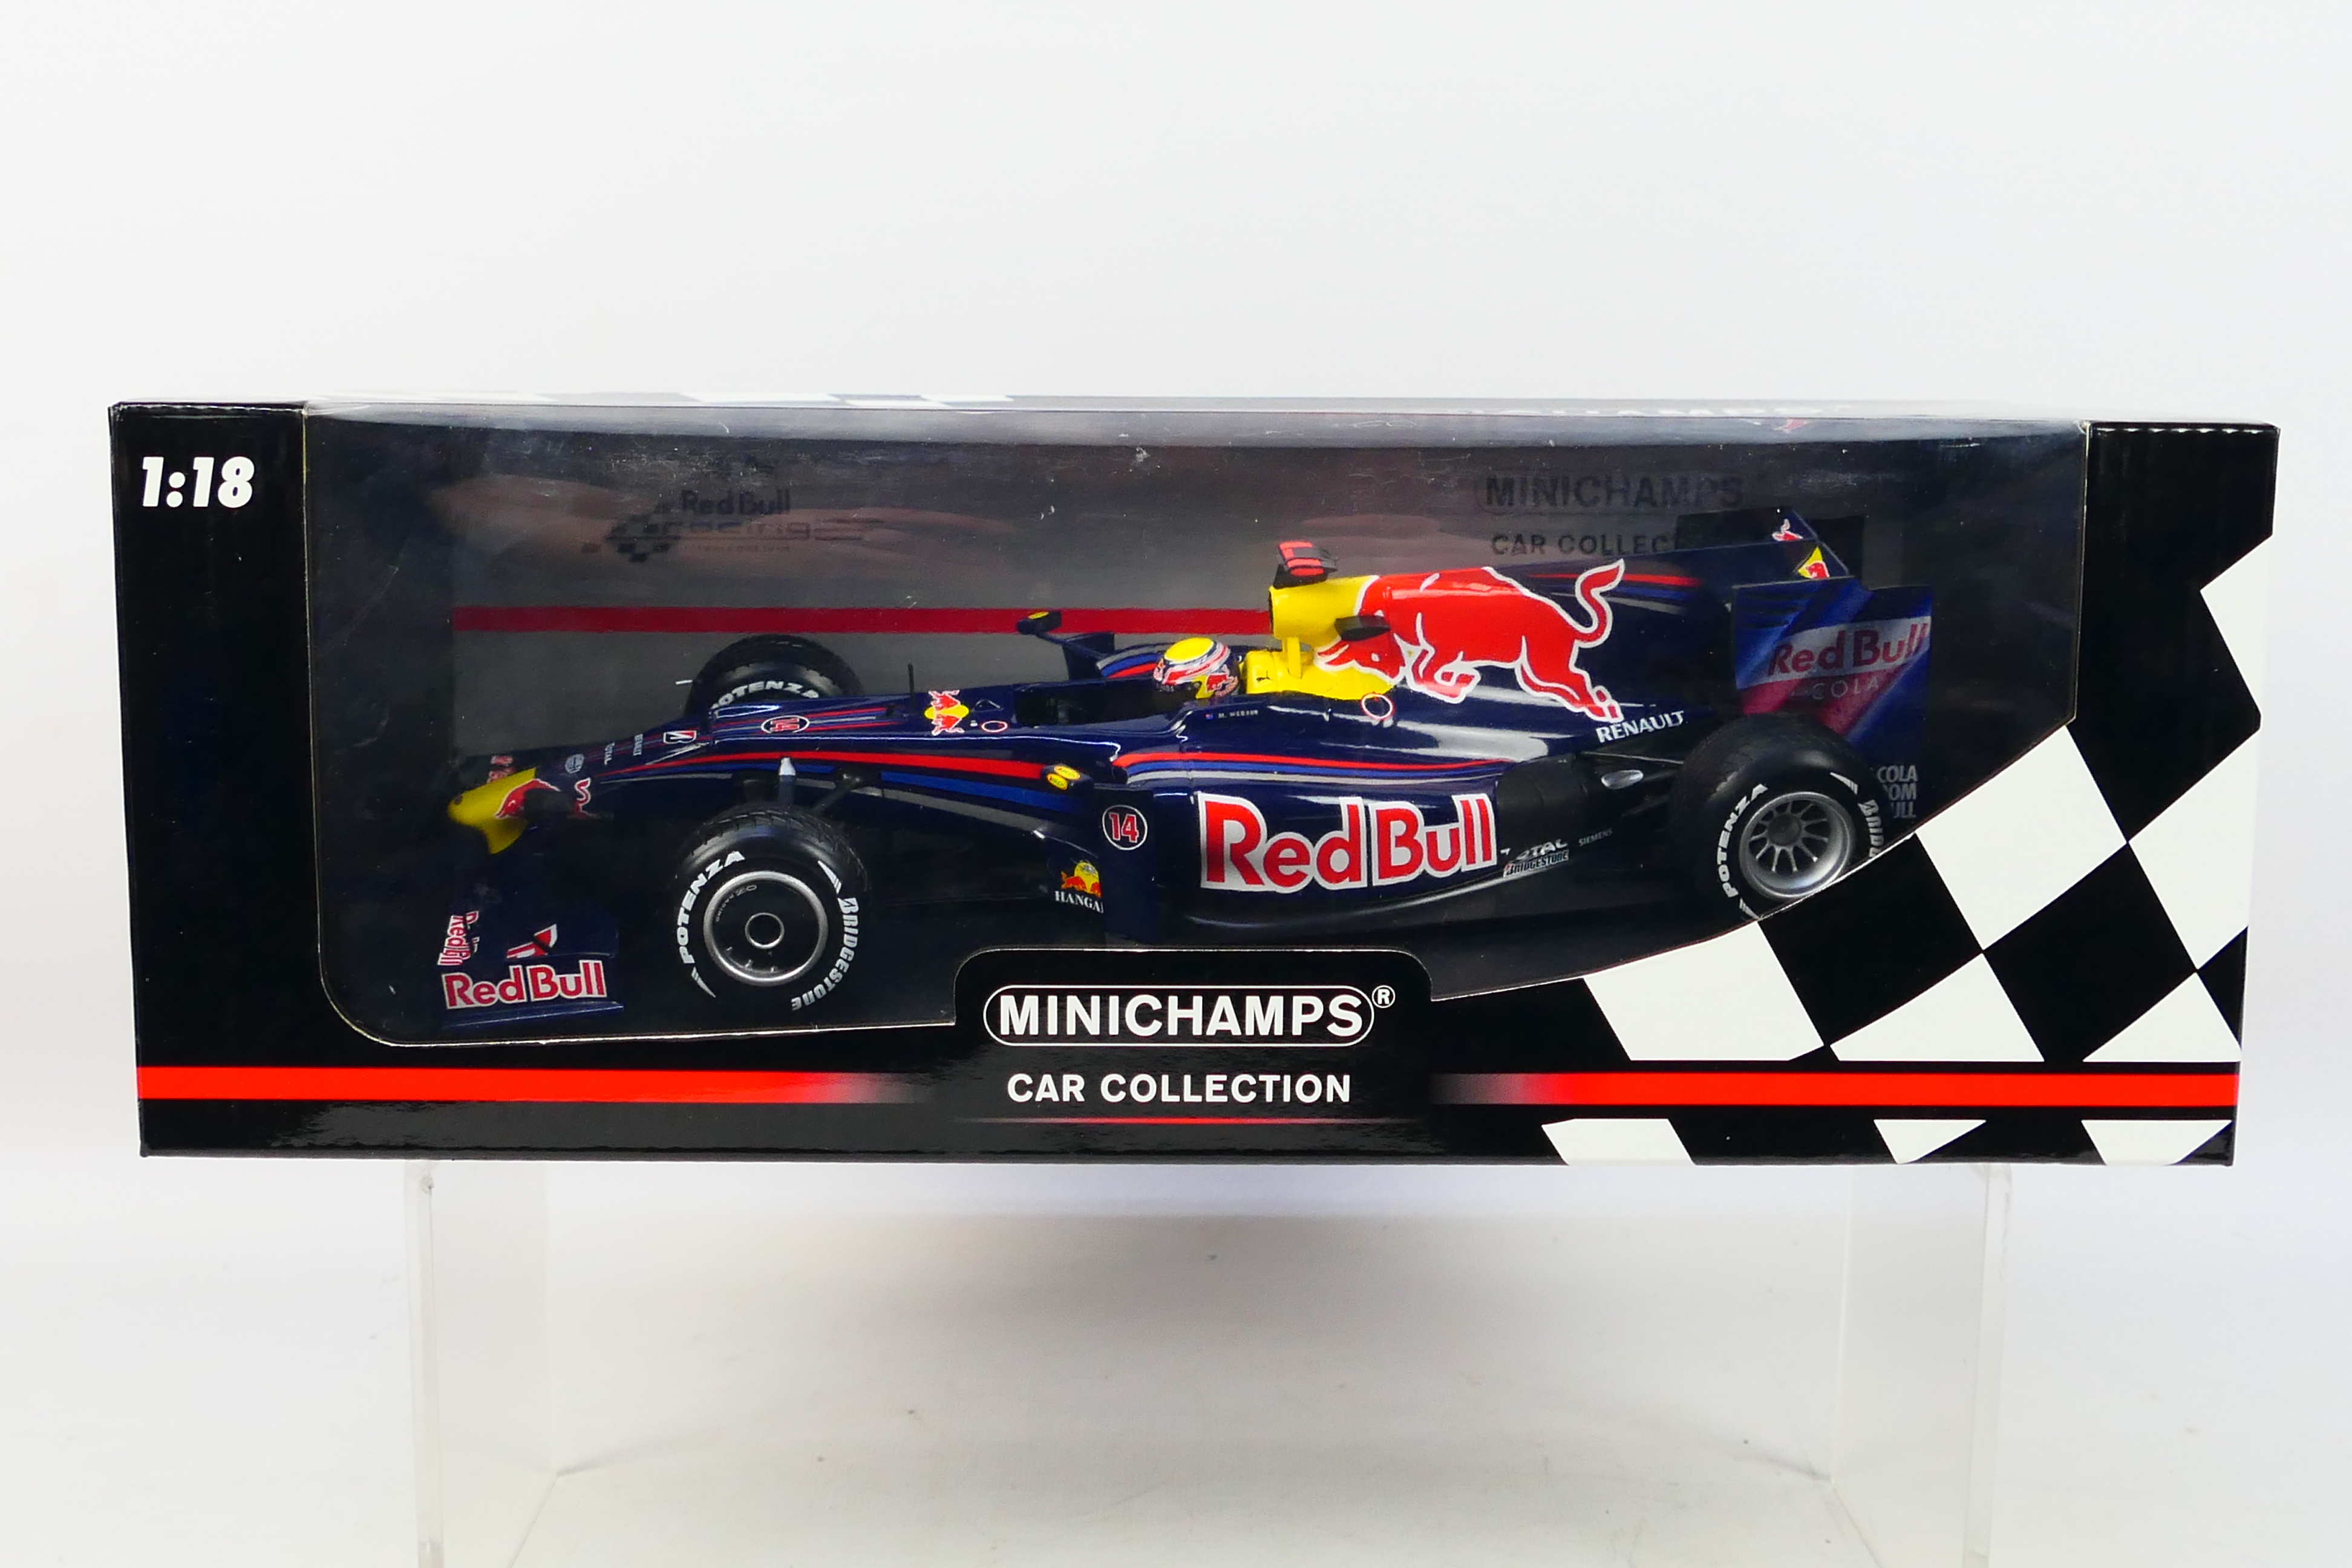 Minichamps - A boxed limited edition 1:18 scale Red Bull Racing Renault RB5 Mark Webber 2nd place